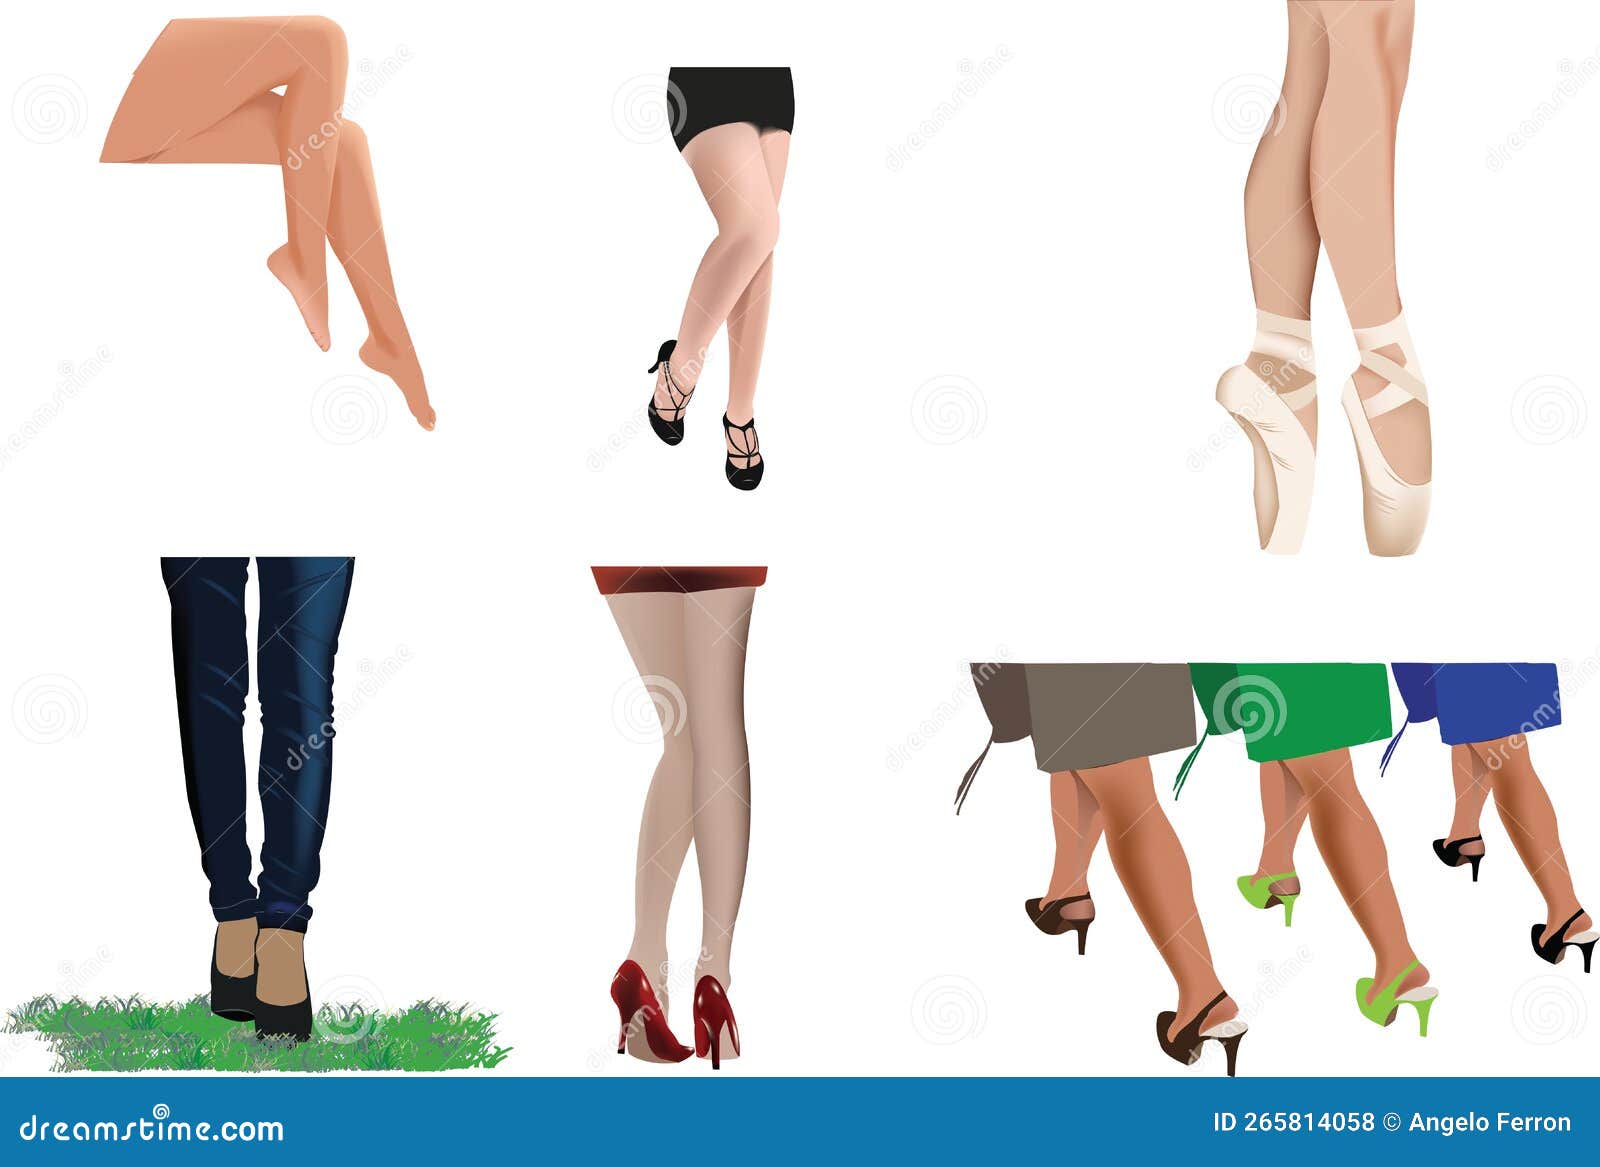 Legs of Moving and Sports Women- Stock Vector - Illustration of